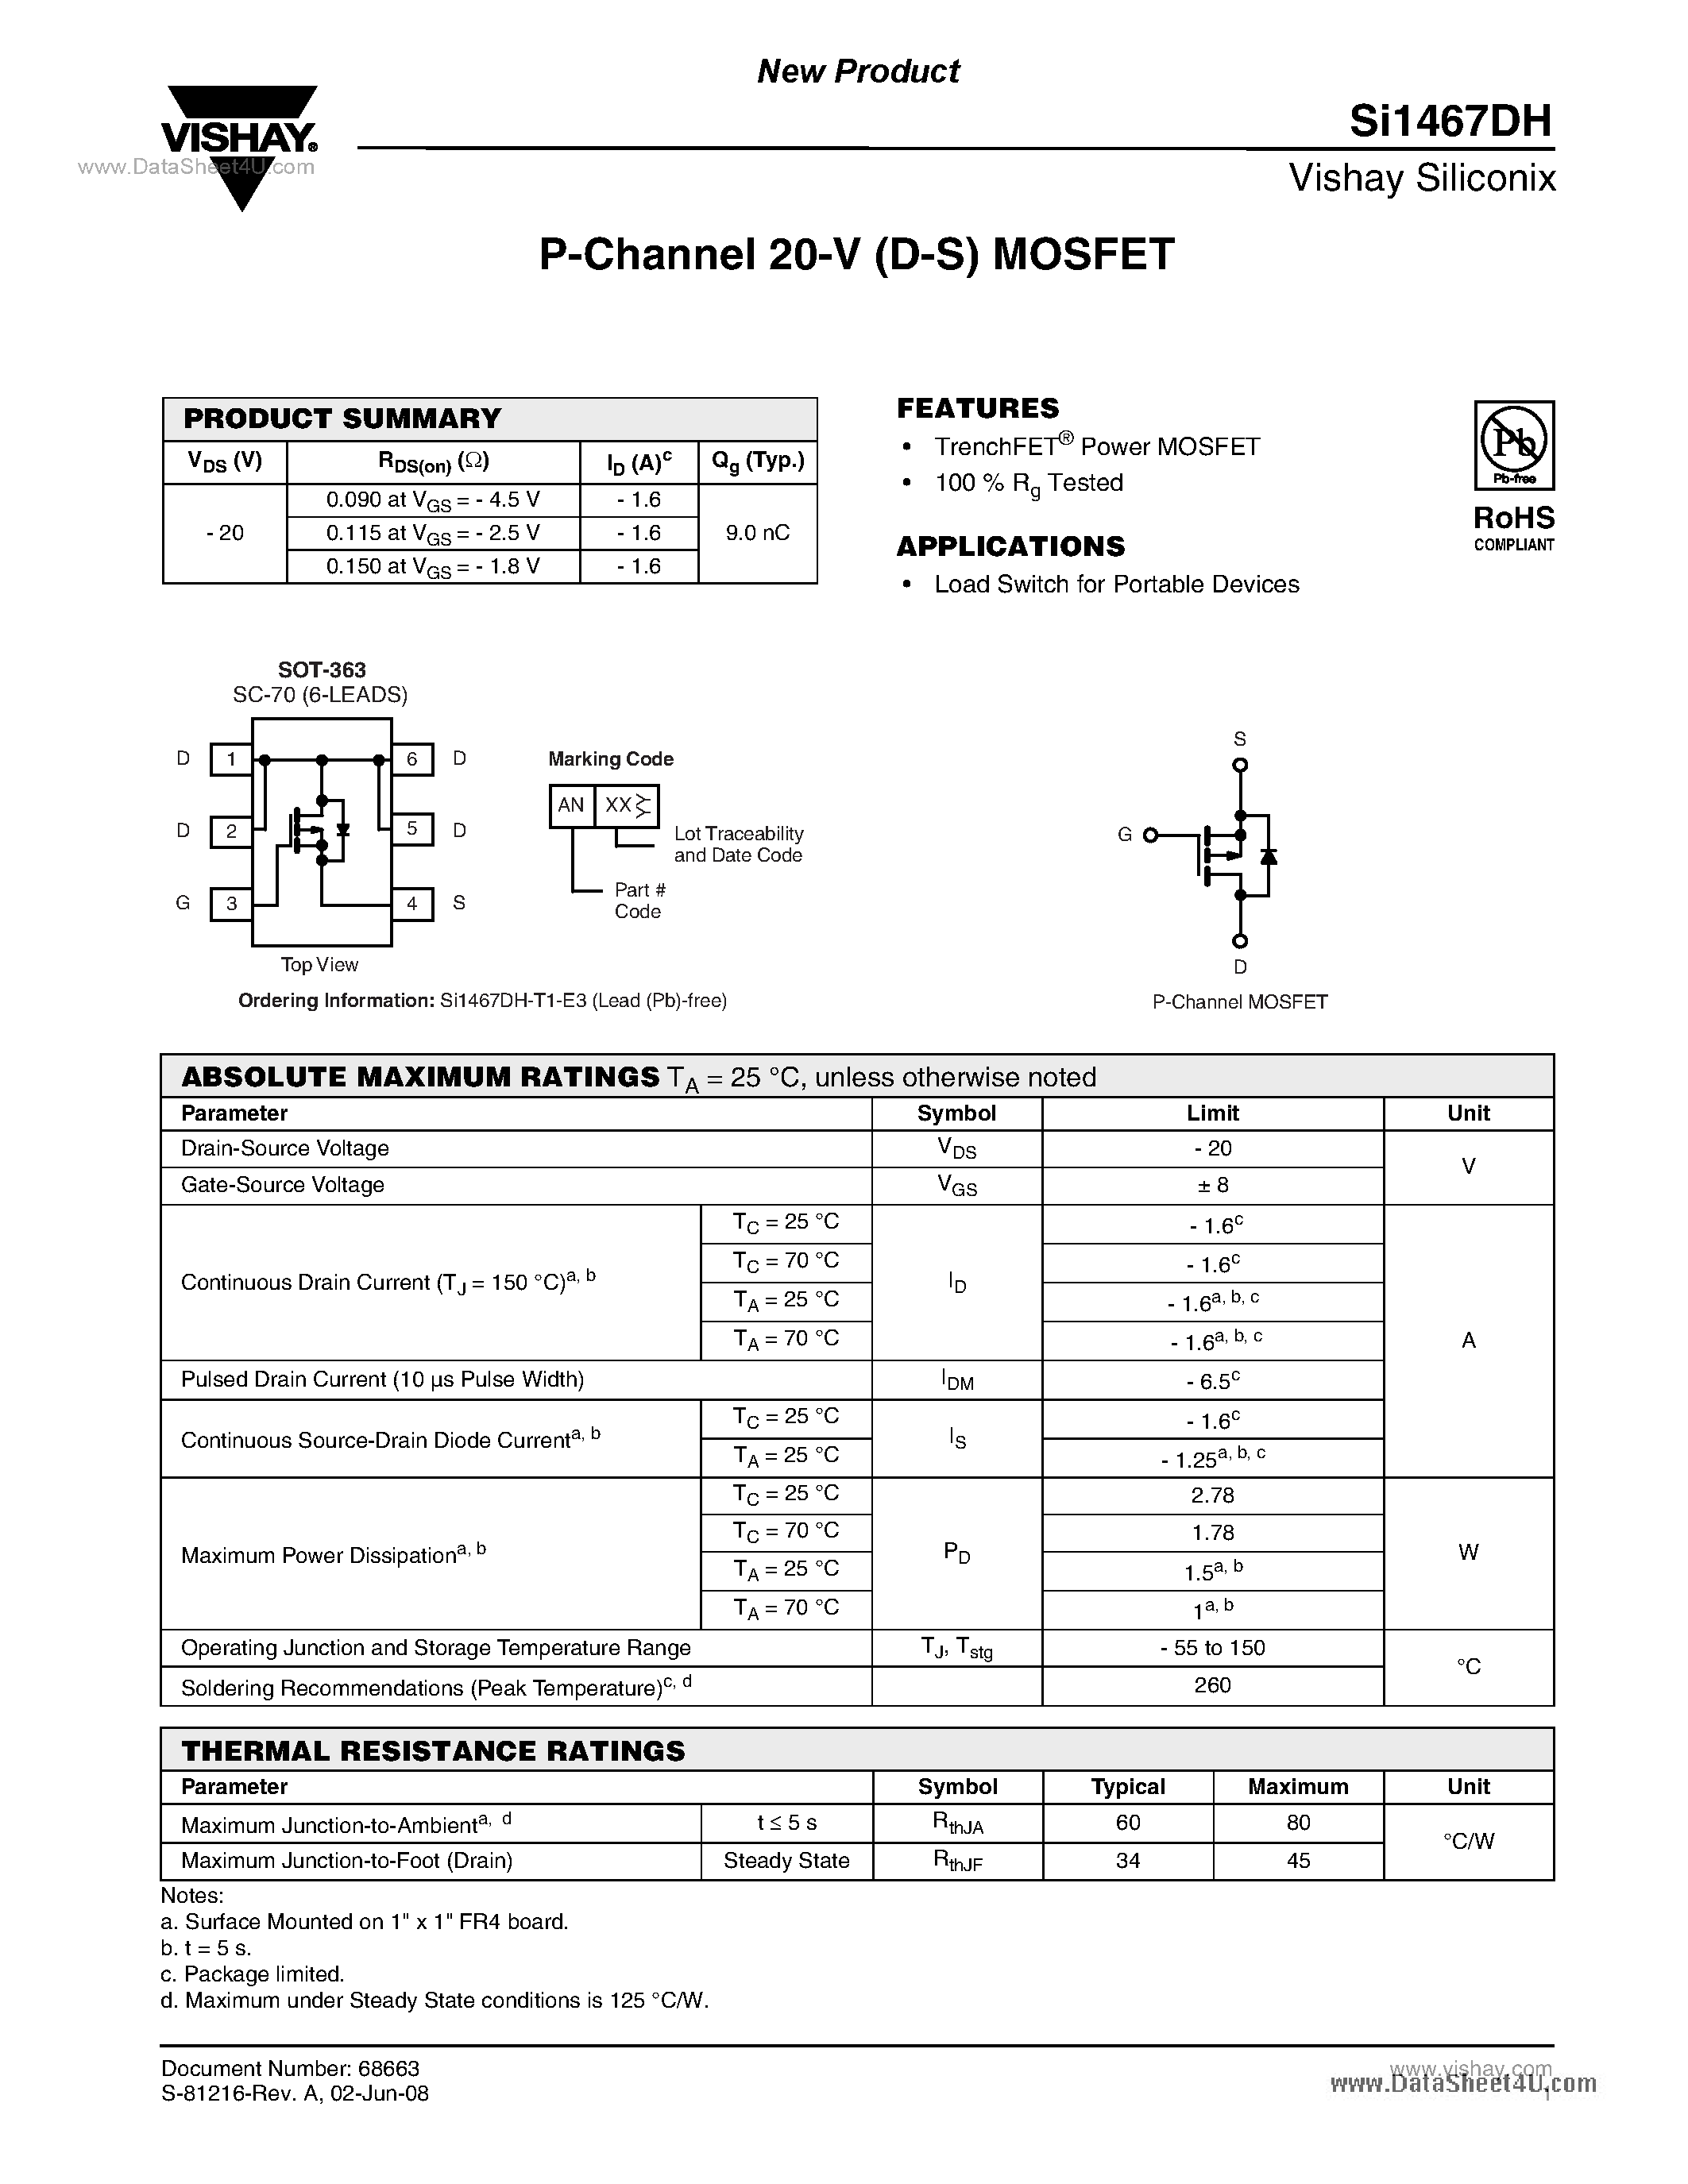 Даташит SI1467DH - P-Channel 20-V (D-S) MOSFET страница 1